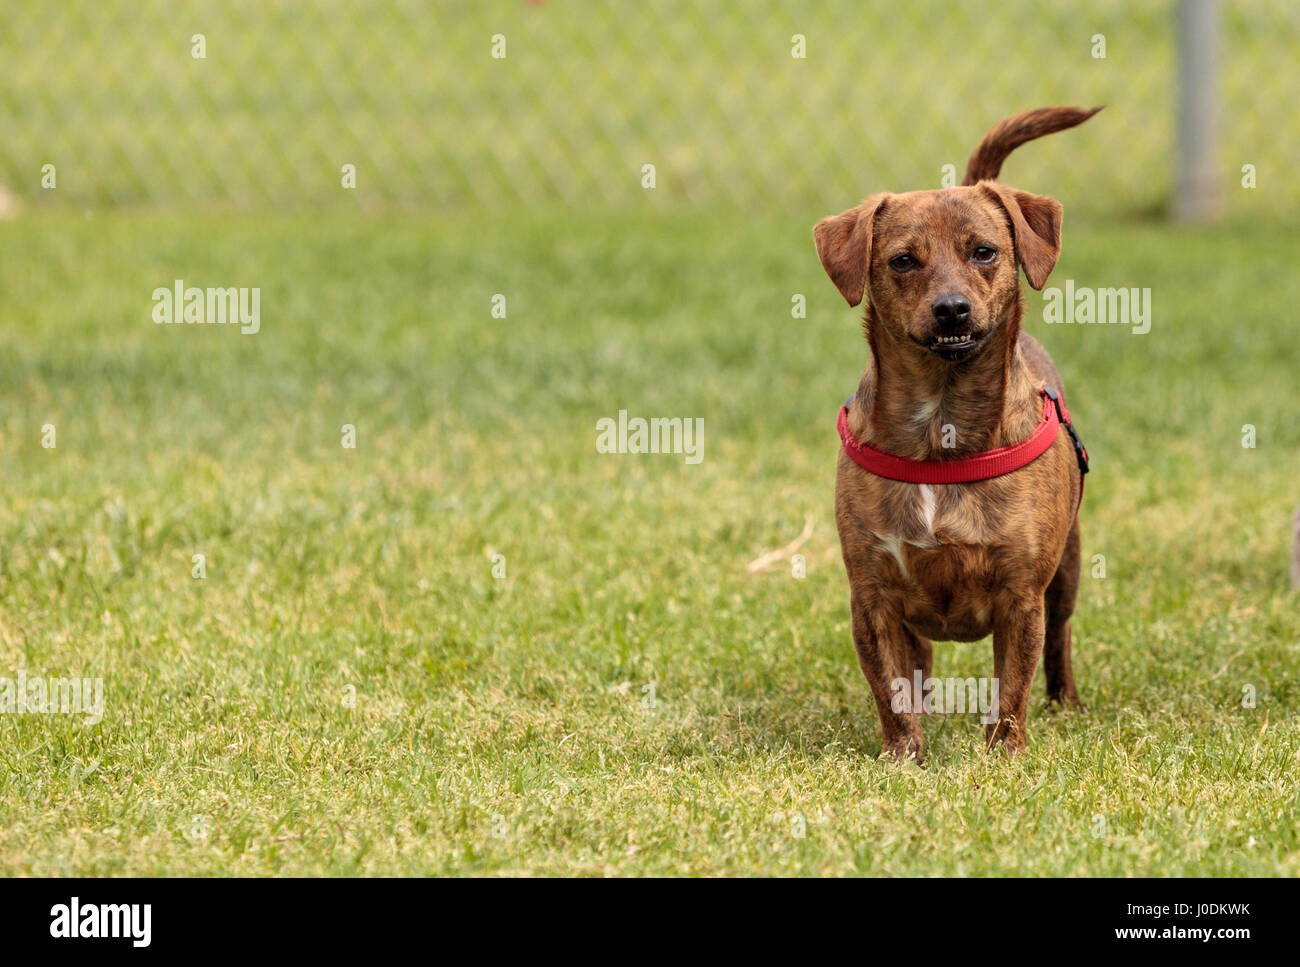 Terrier dog mix plays in a dog park in summer. Stock Photo